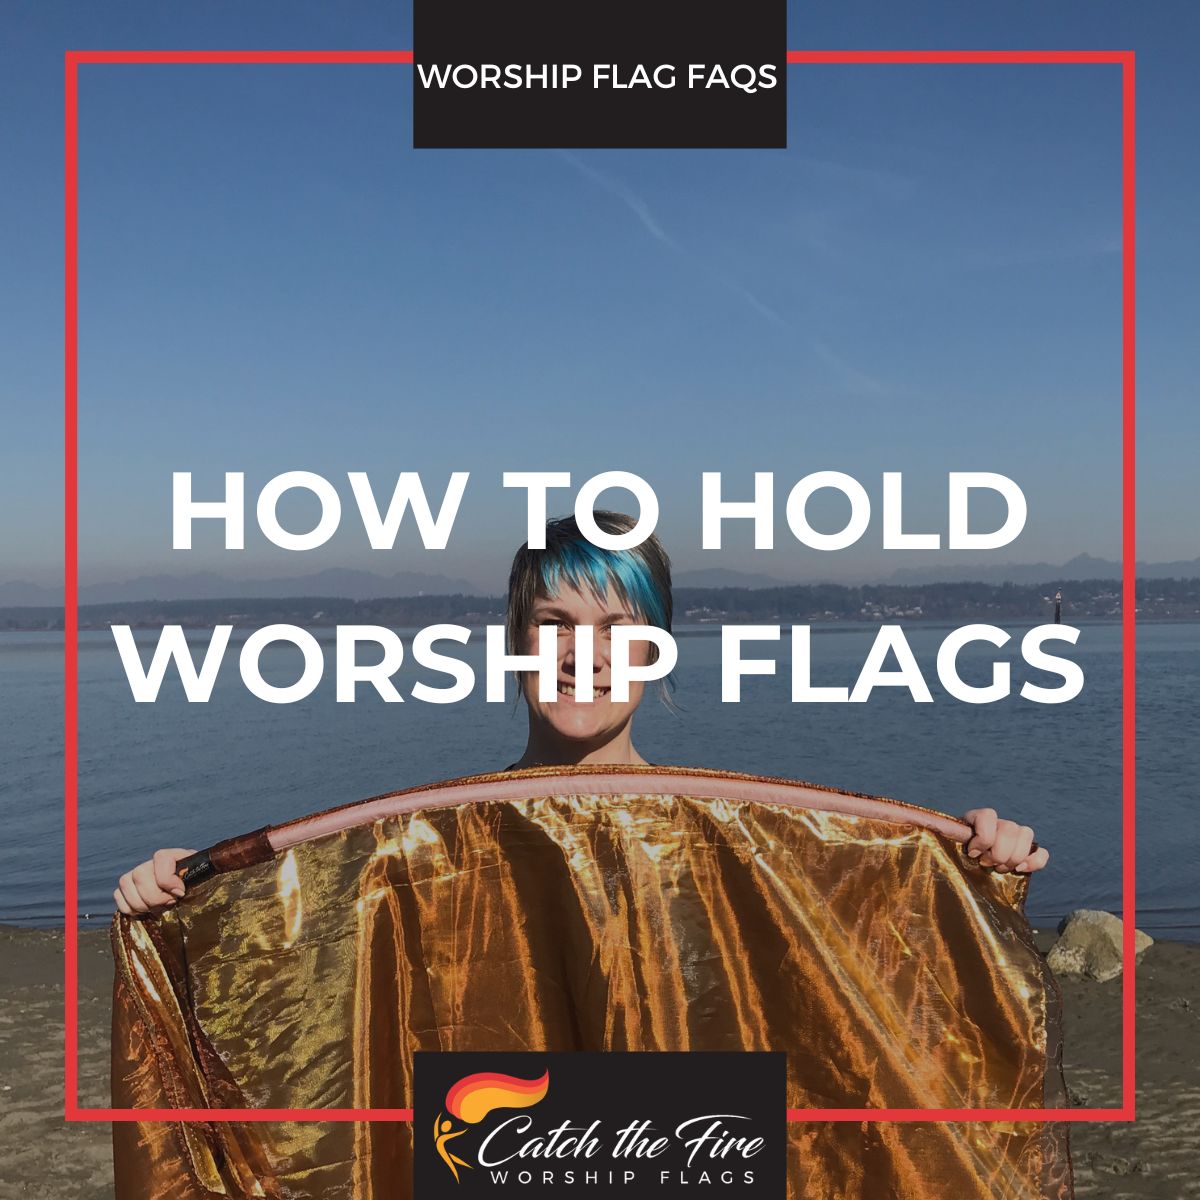 How to Use Worship Flags cover photo